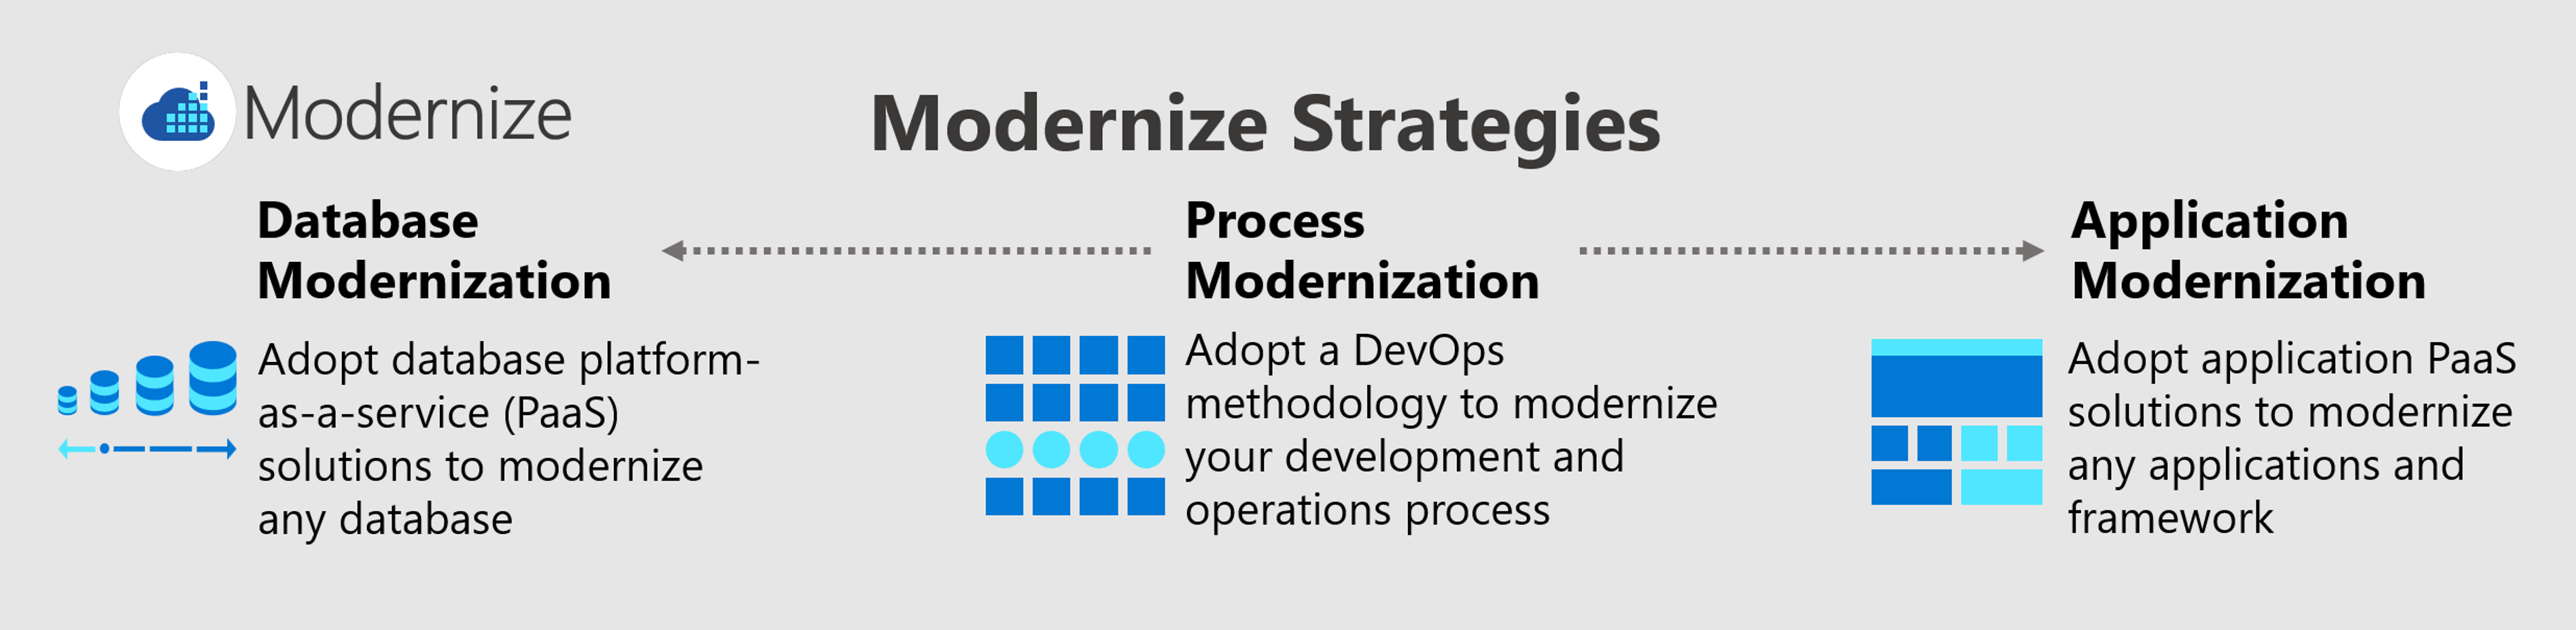 Diagram that shows where you are in the modernize strategies process. The image shows three modernization strategies. Process modernization is in the middle with an arrow pointing to the two other modernization strategies. Database modernization is on the left and application modernization is on the right.